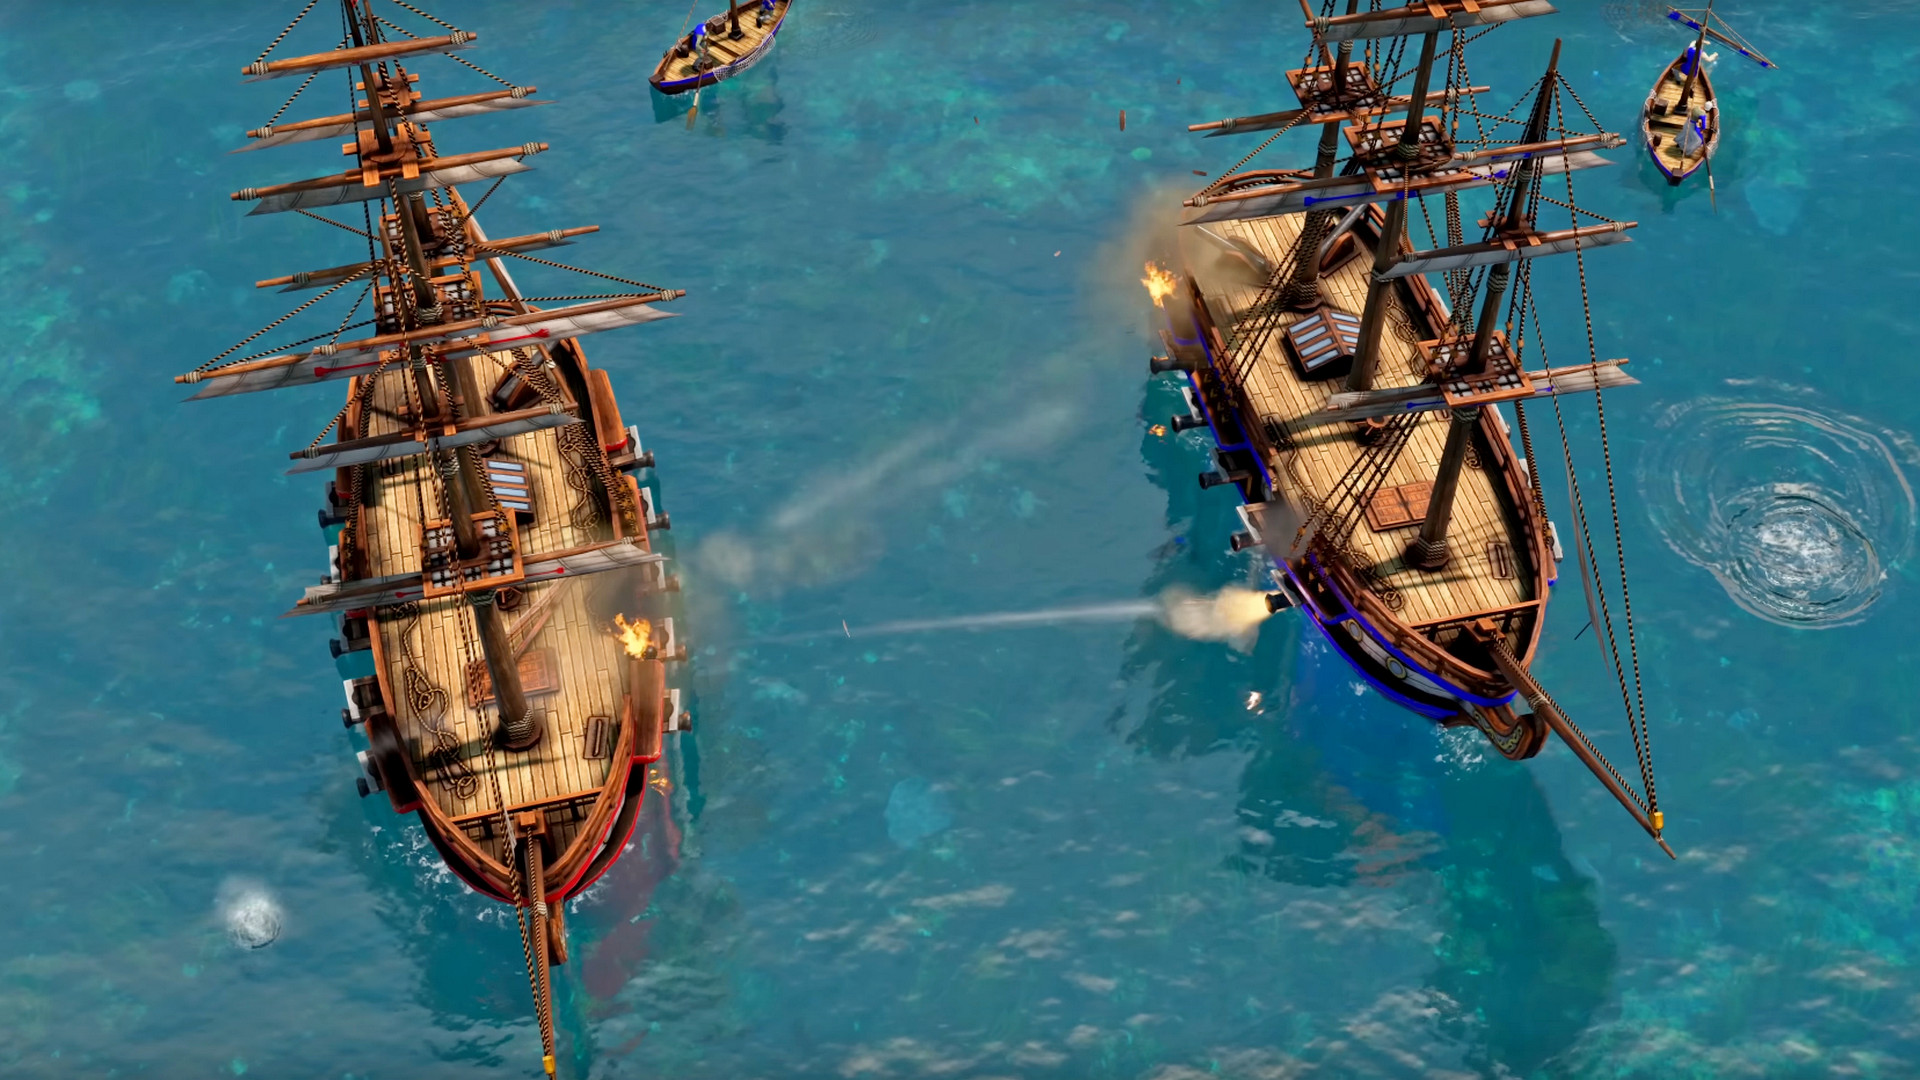 aoe3 knights of the mediterranean download free